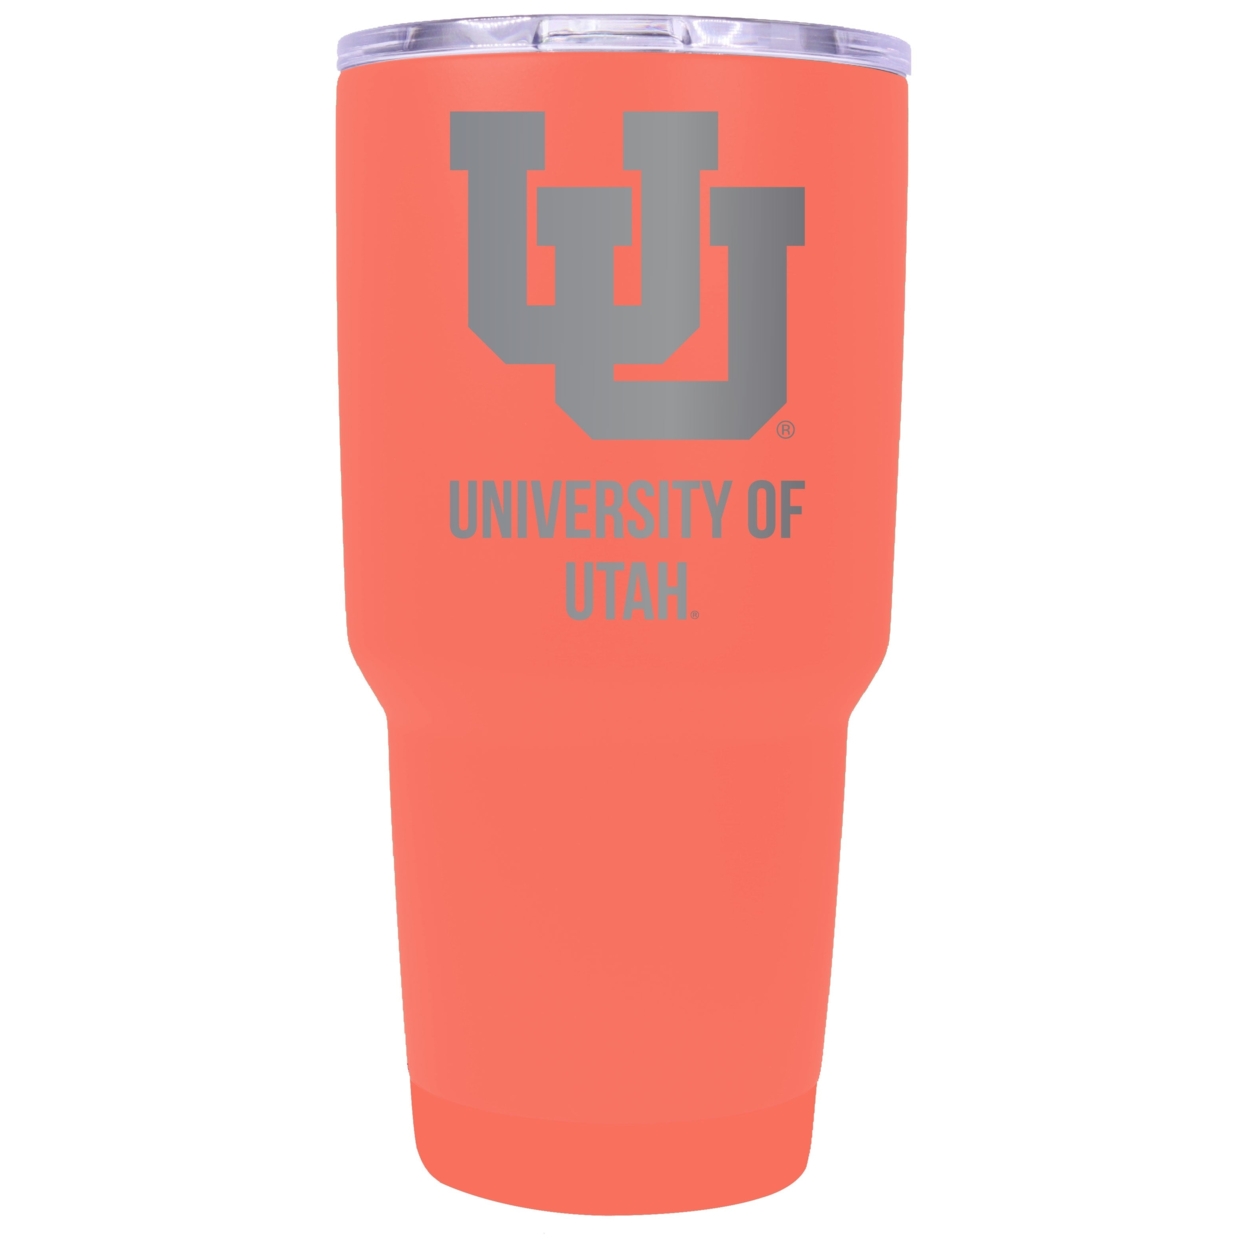 Utah Utes 24 Oz Laser Engraved Stainless Steel Insulated Tumbler - Choose Your Color. - Coral